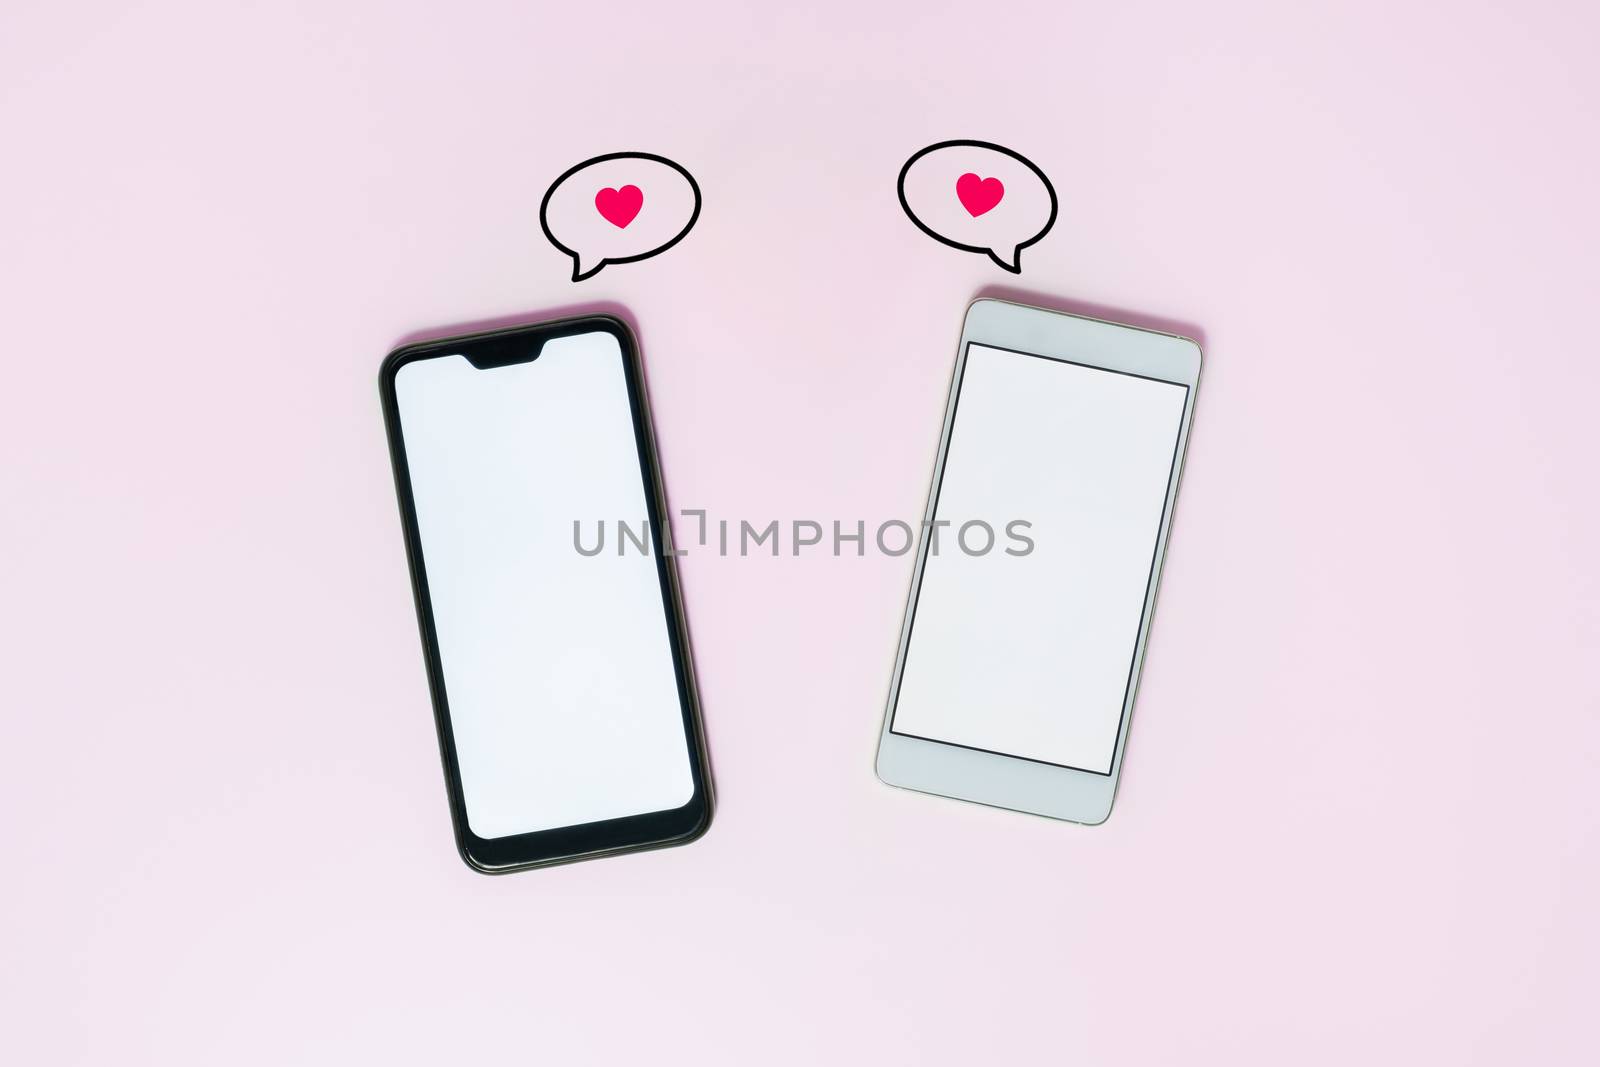 Phones on pink background with love text messages by photoboyko